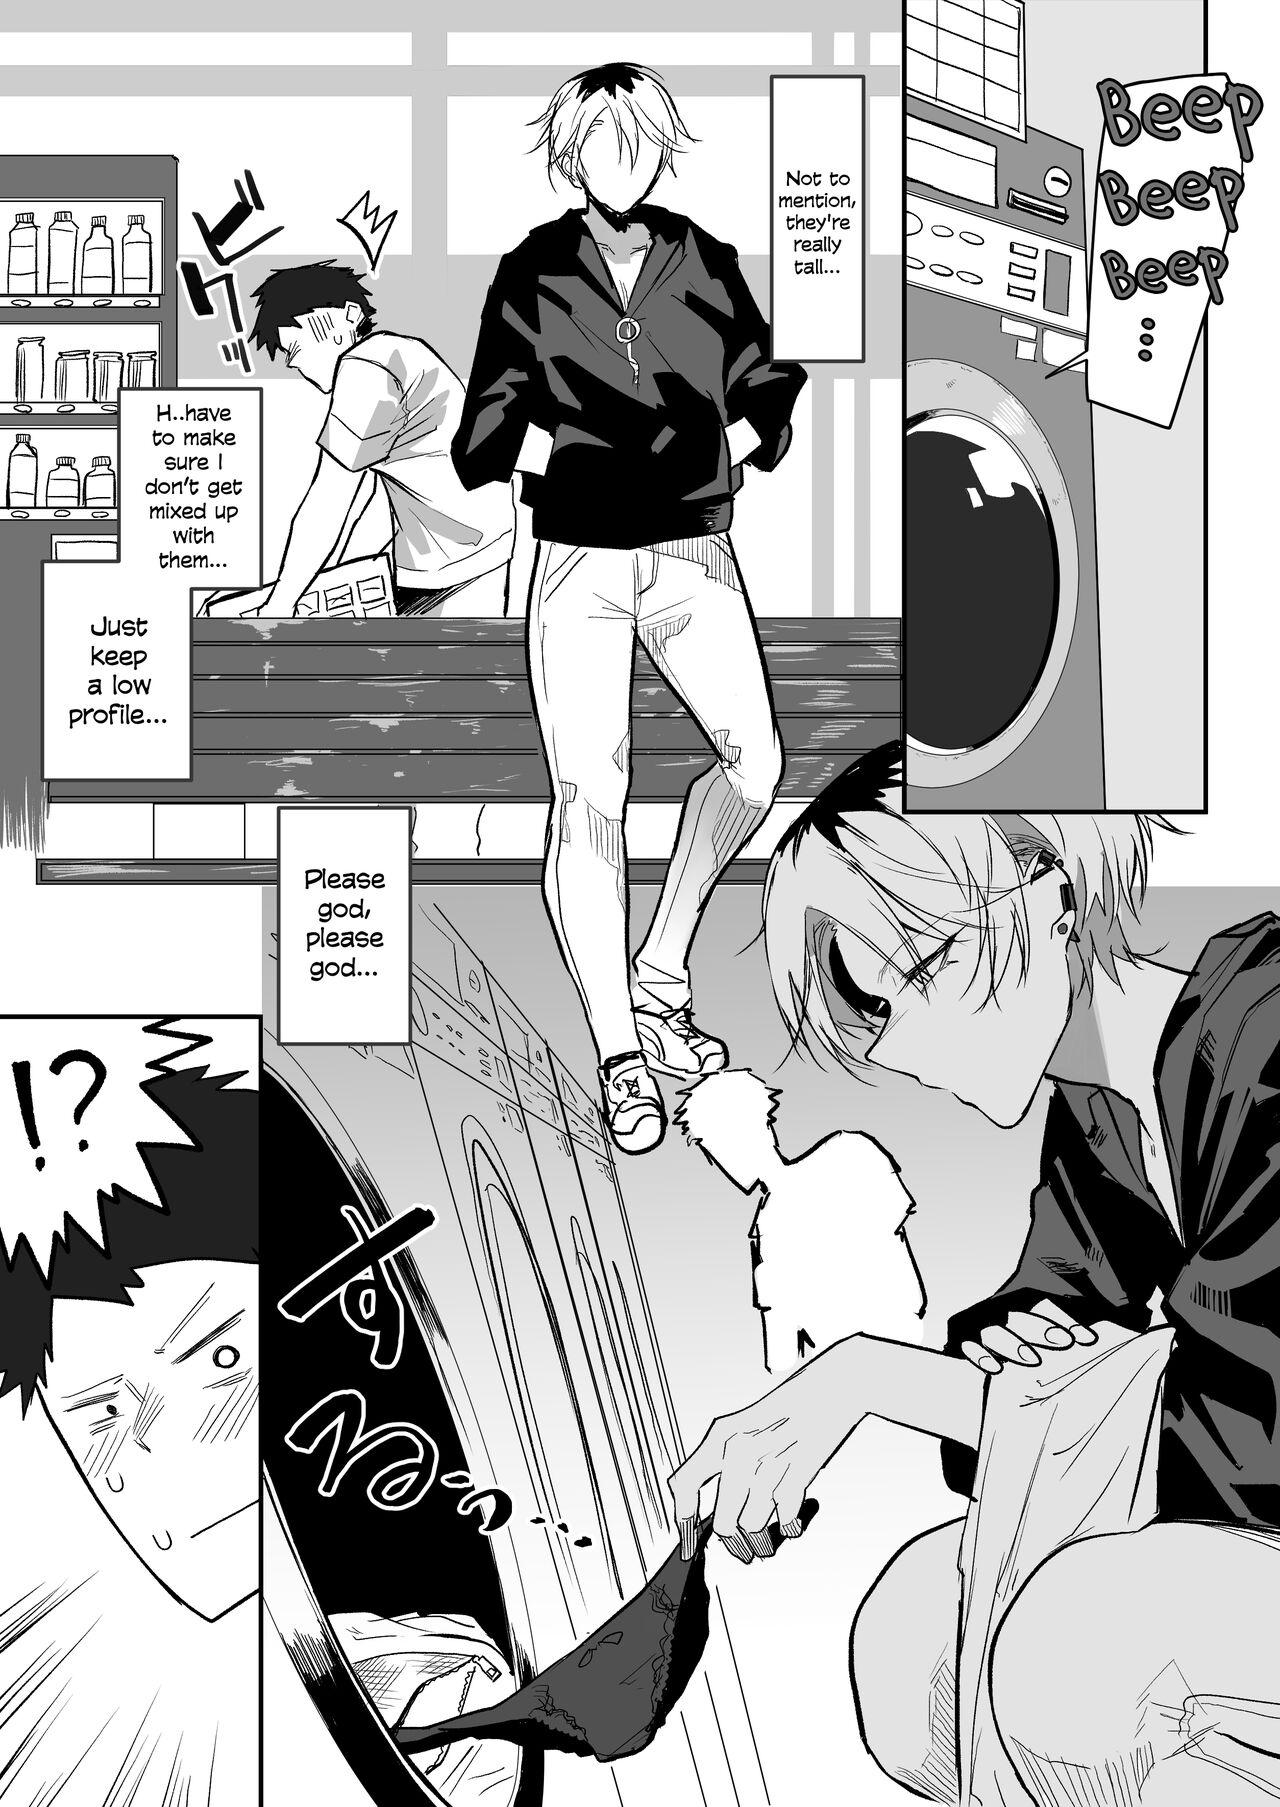 Suruba Coin Laundry de Kowai Yankee ni Karamareru Manga | A Manga About Getting Mixed Up With A Scary Delinquent At The Laundromat - Original Longhair - Picture 2